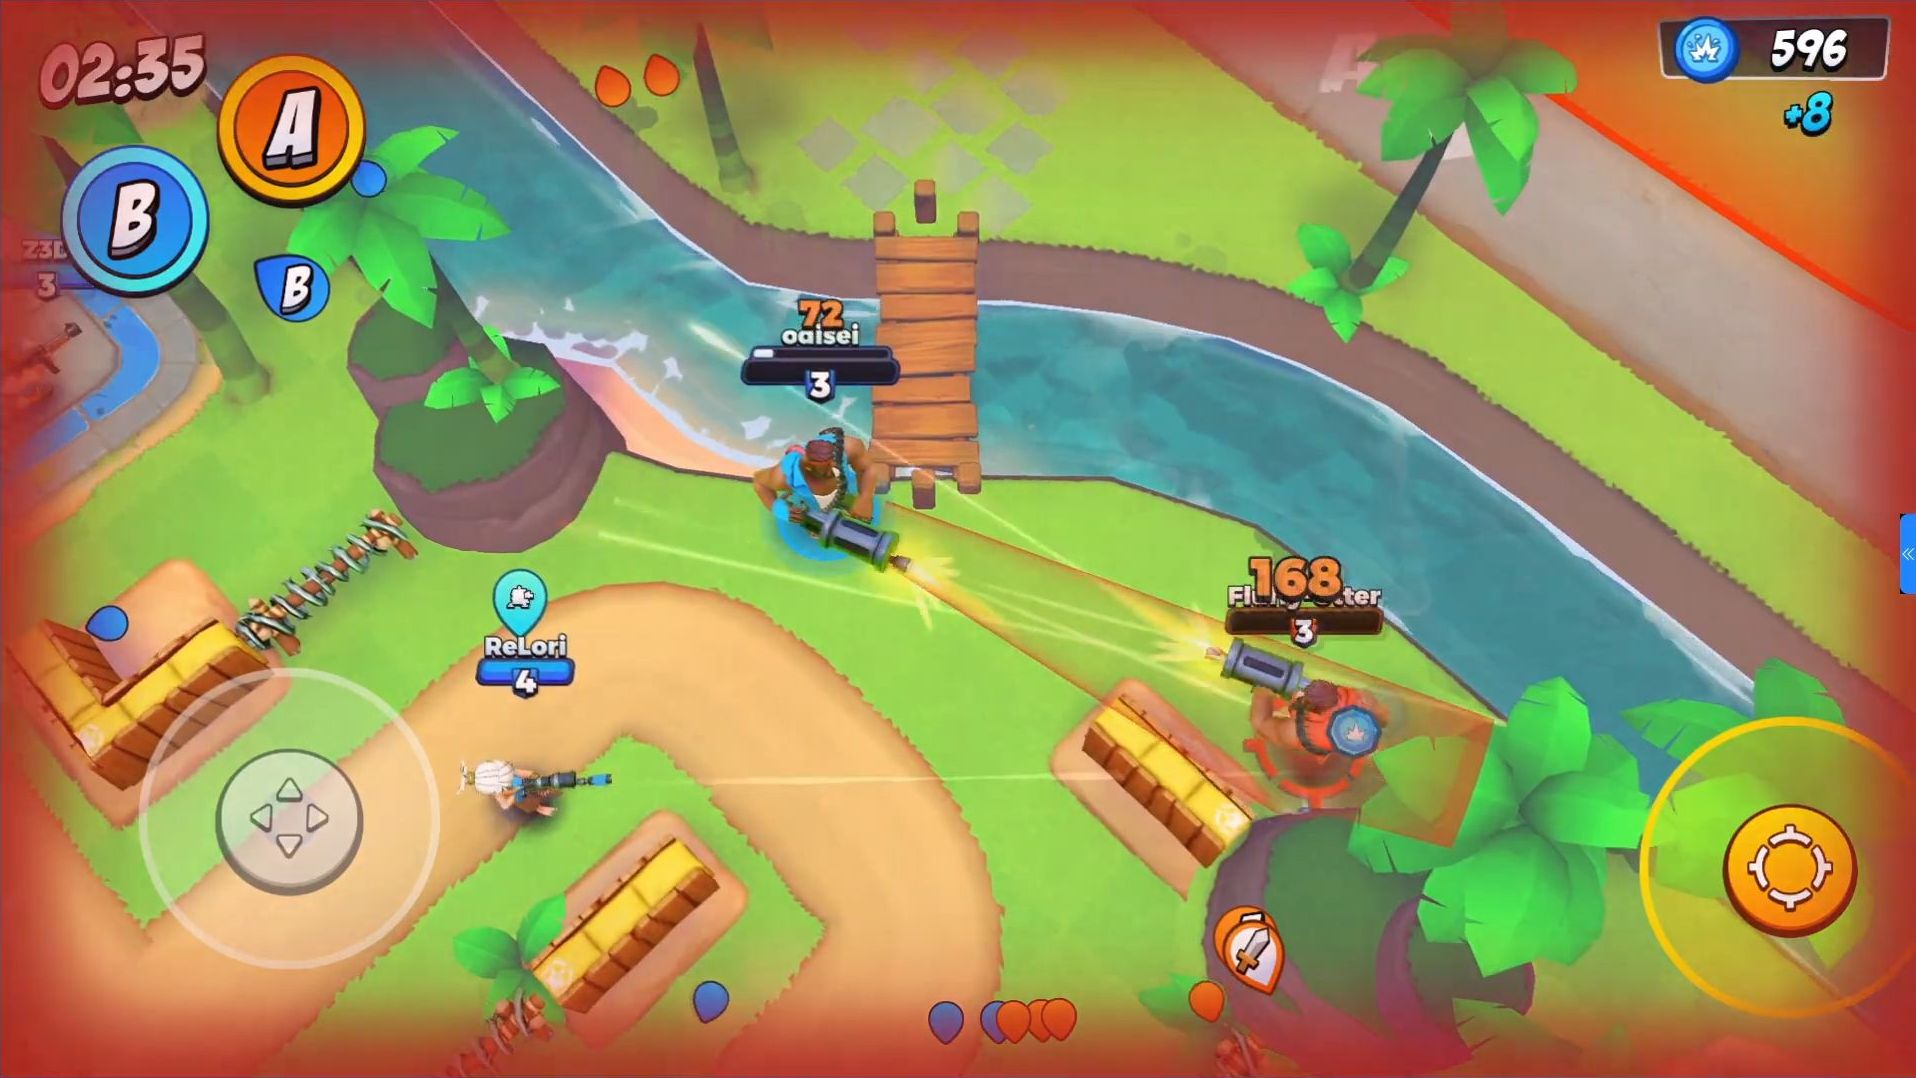 Gameplay of the Boom Beach: Frontlines for Android phone or tablet.